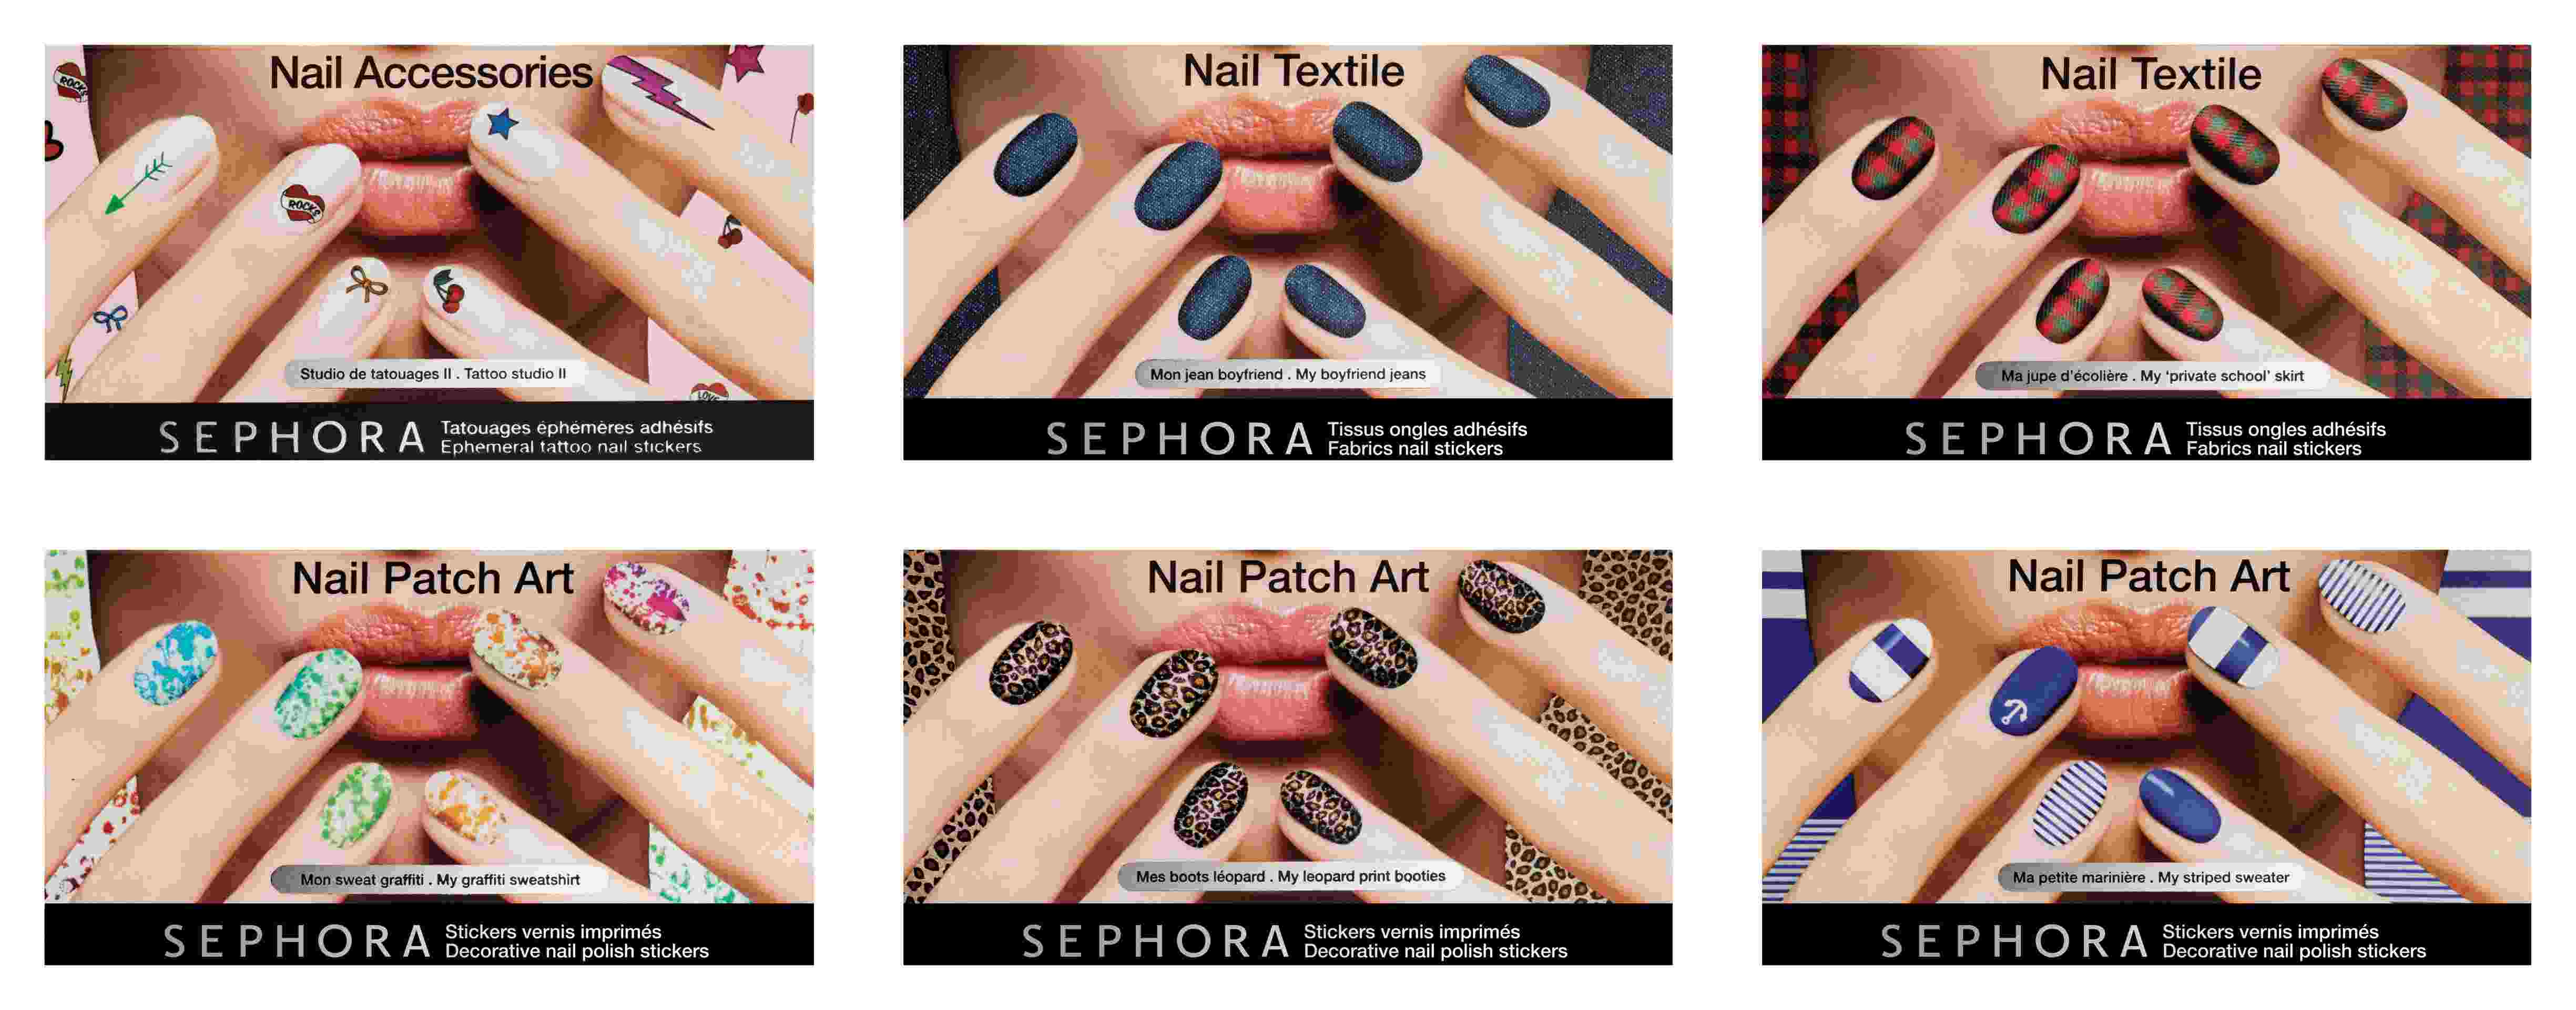 8. Nail Art Supplies and Tools for Sale at Sephora - wide 4